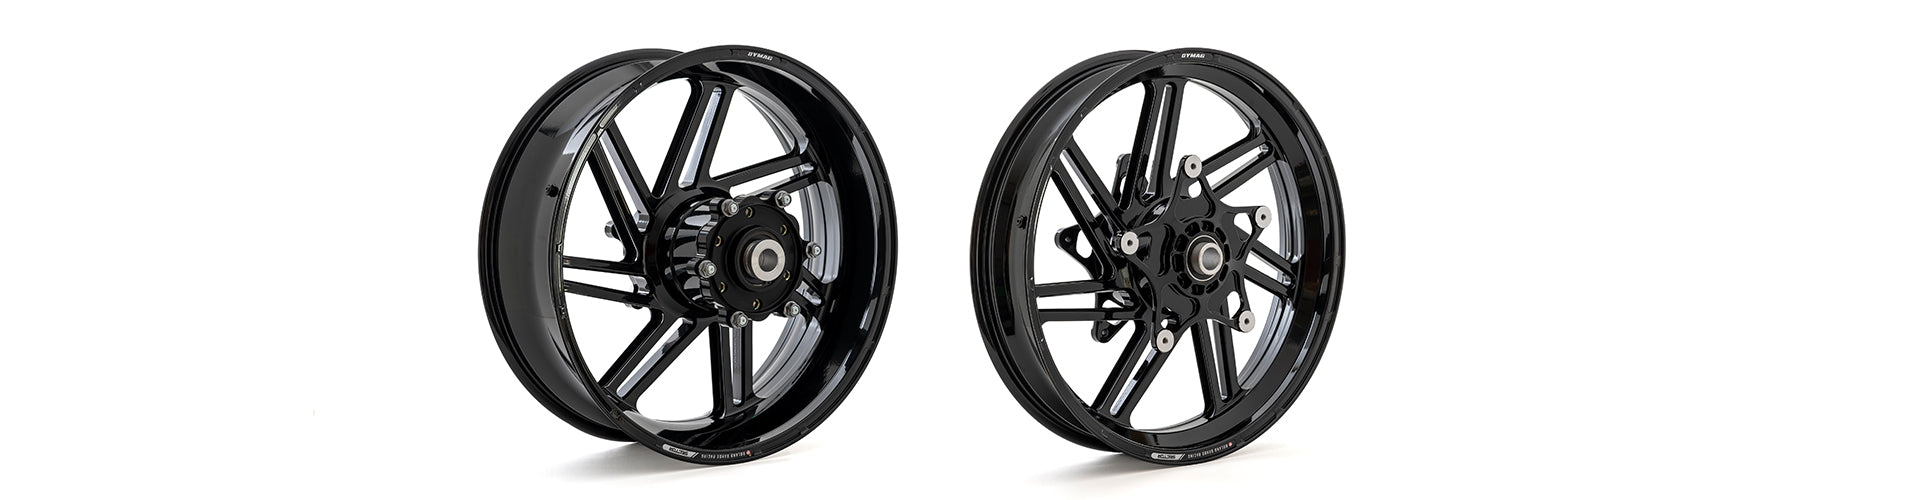 Two sleek black Dymag racing wheels side by side against a white background. Both wheels feature intricate spoke designs with a shiny finish, labeled 'Dymag UP7X' and equipped with central hubs for high-performance racing applications.